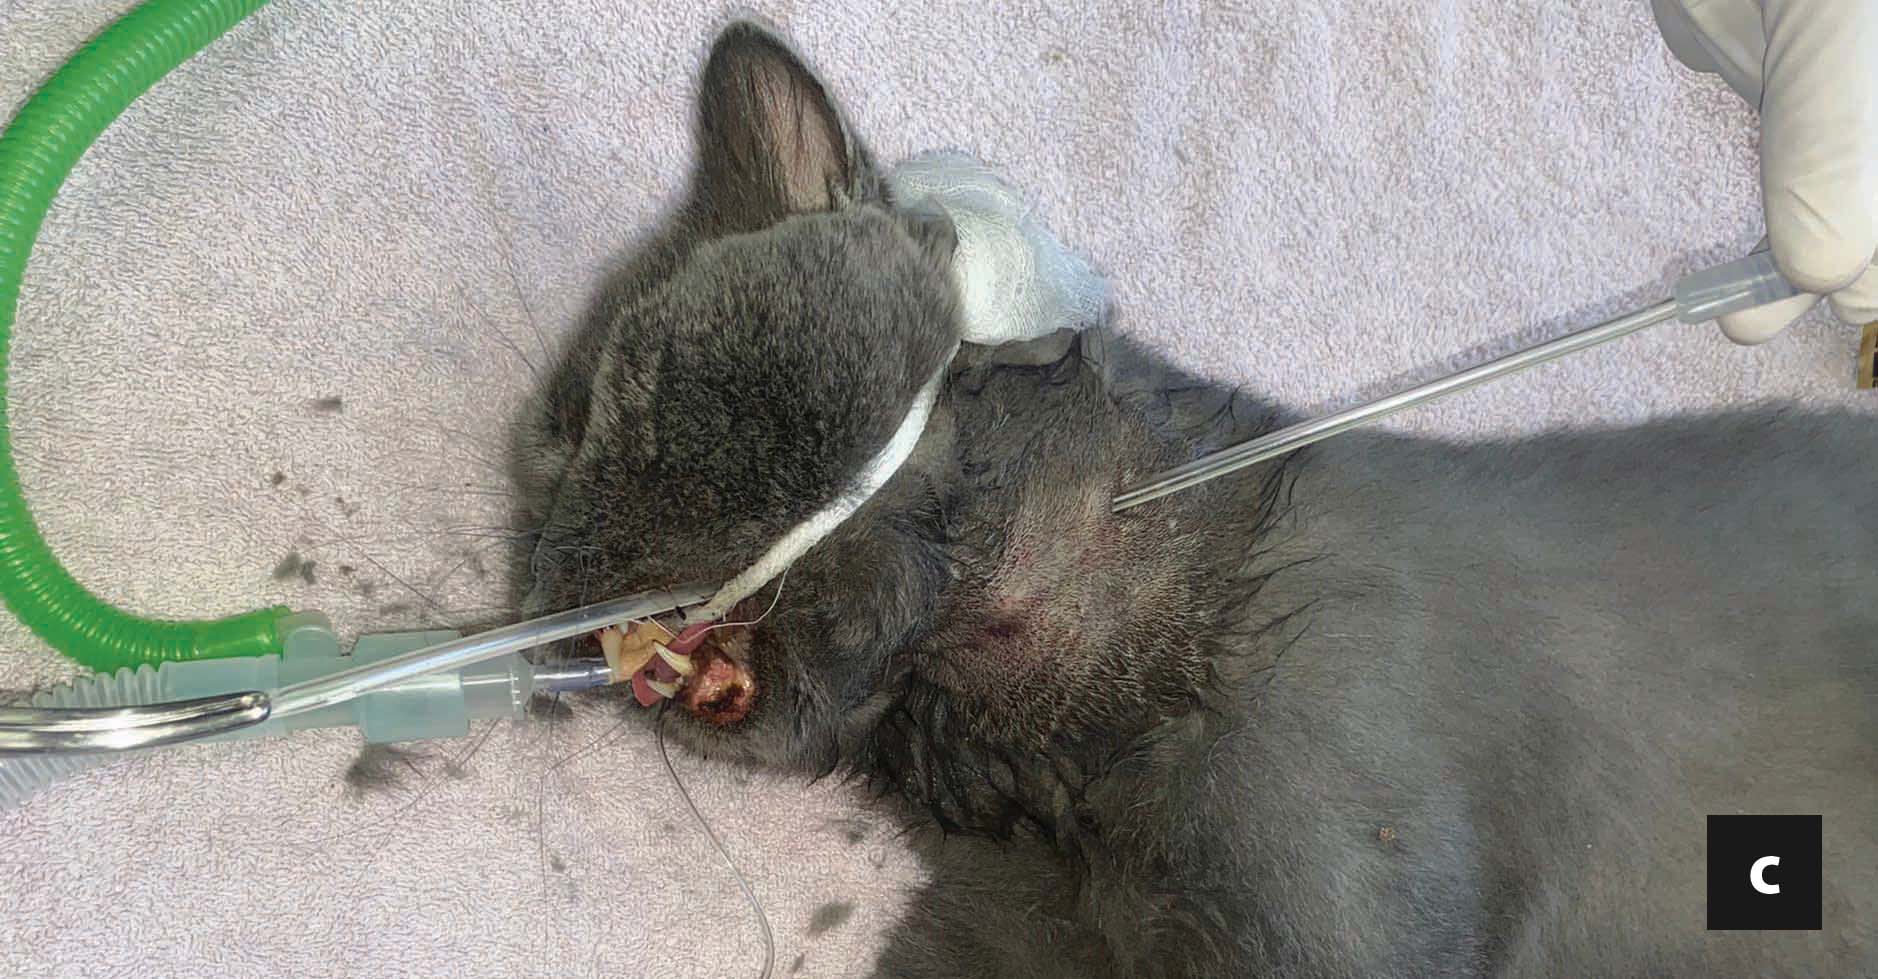 feeding tube is grabbed and retracted out of the mouth 